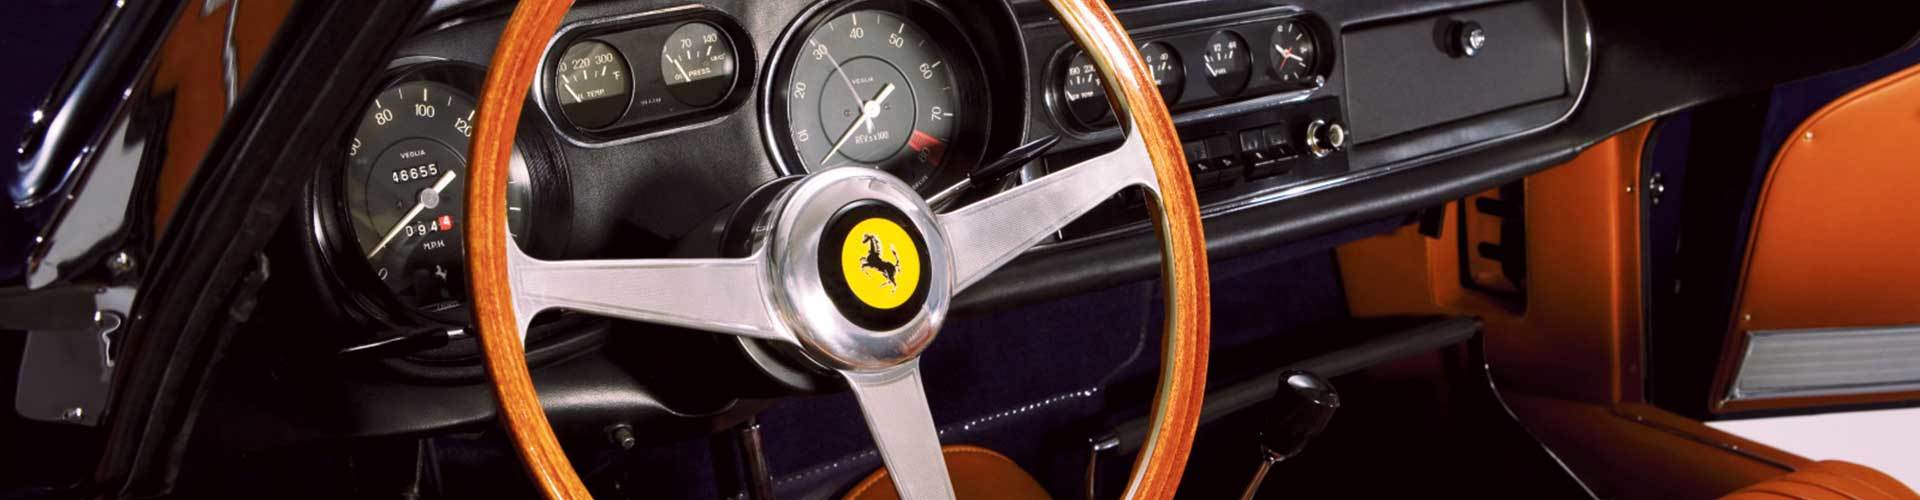 Genuine Ferrari body parts. - United Kingdom, Other Countries - Free Online Classified Ads